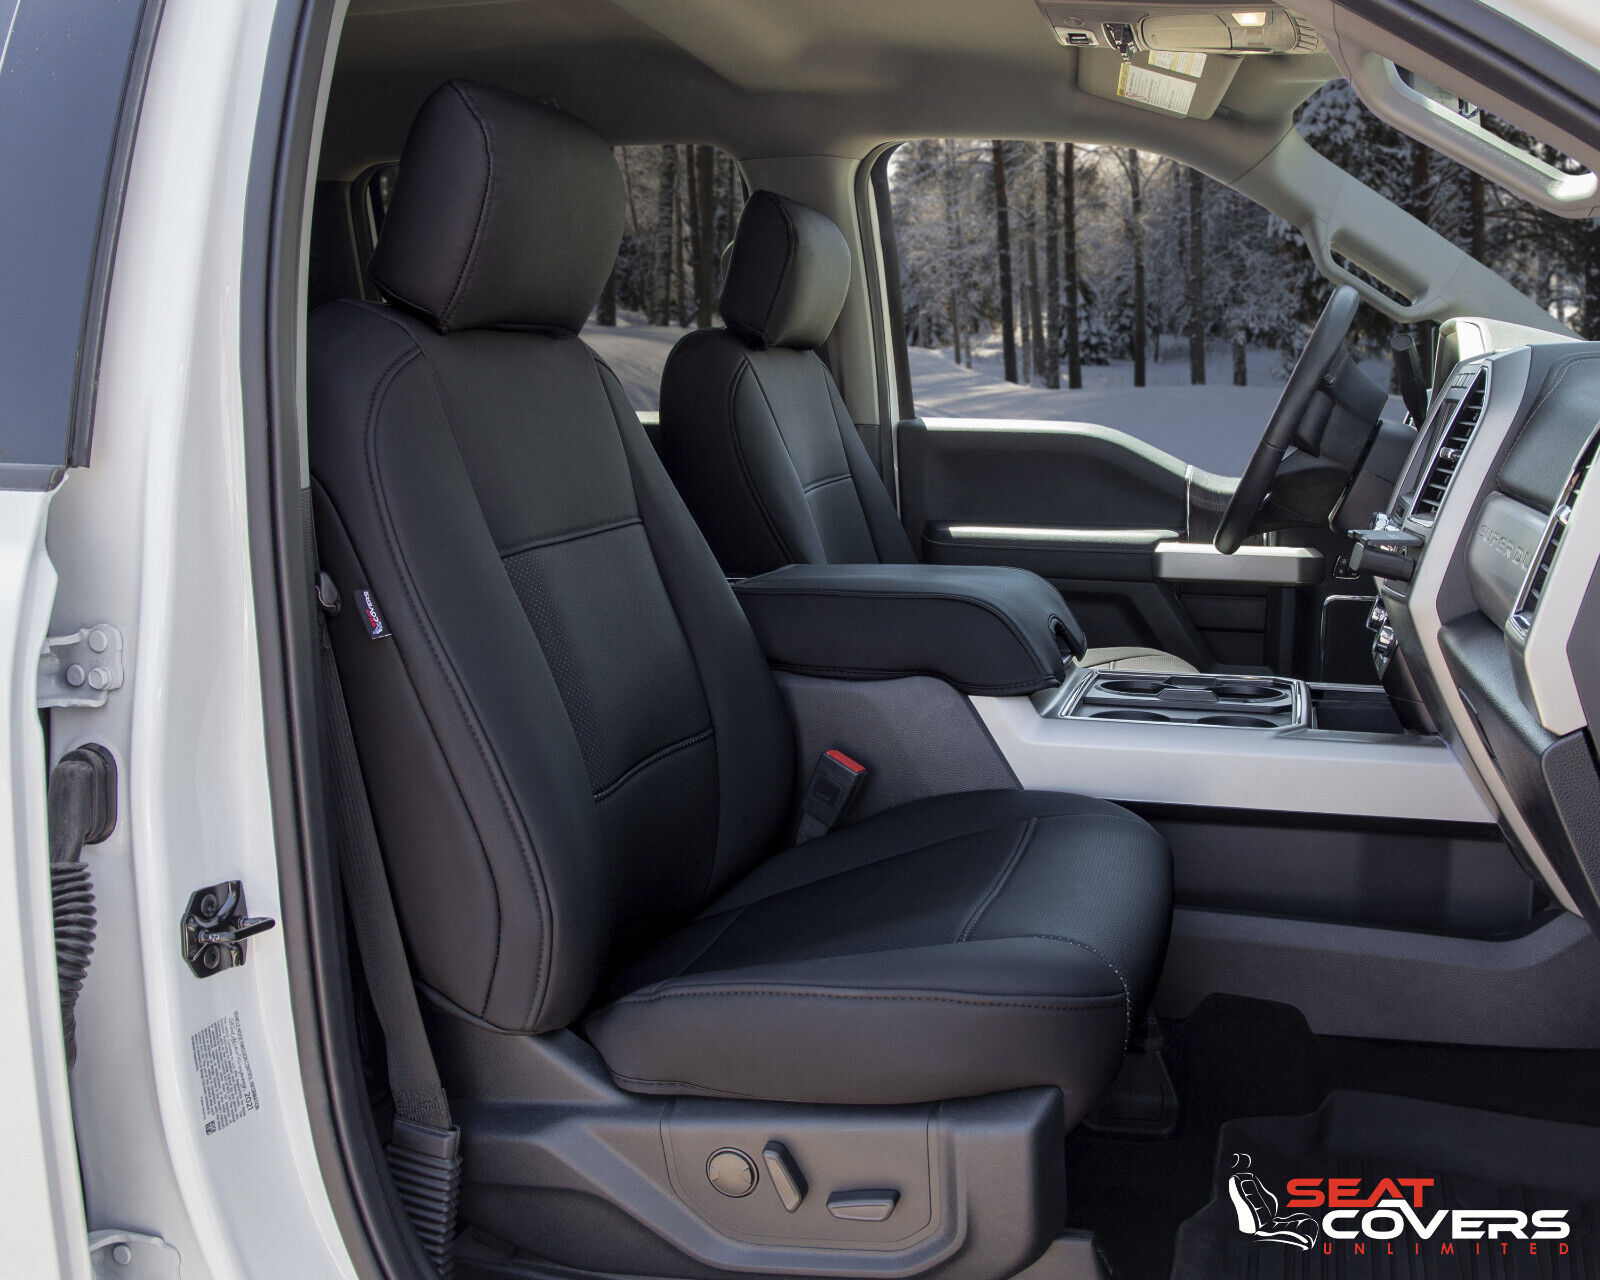 CUSTOM LEATHERETTE FRONT & REAR SEAT COVERS for the 2015-2020 Ford F-150 Crew